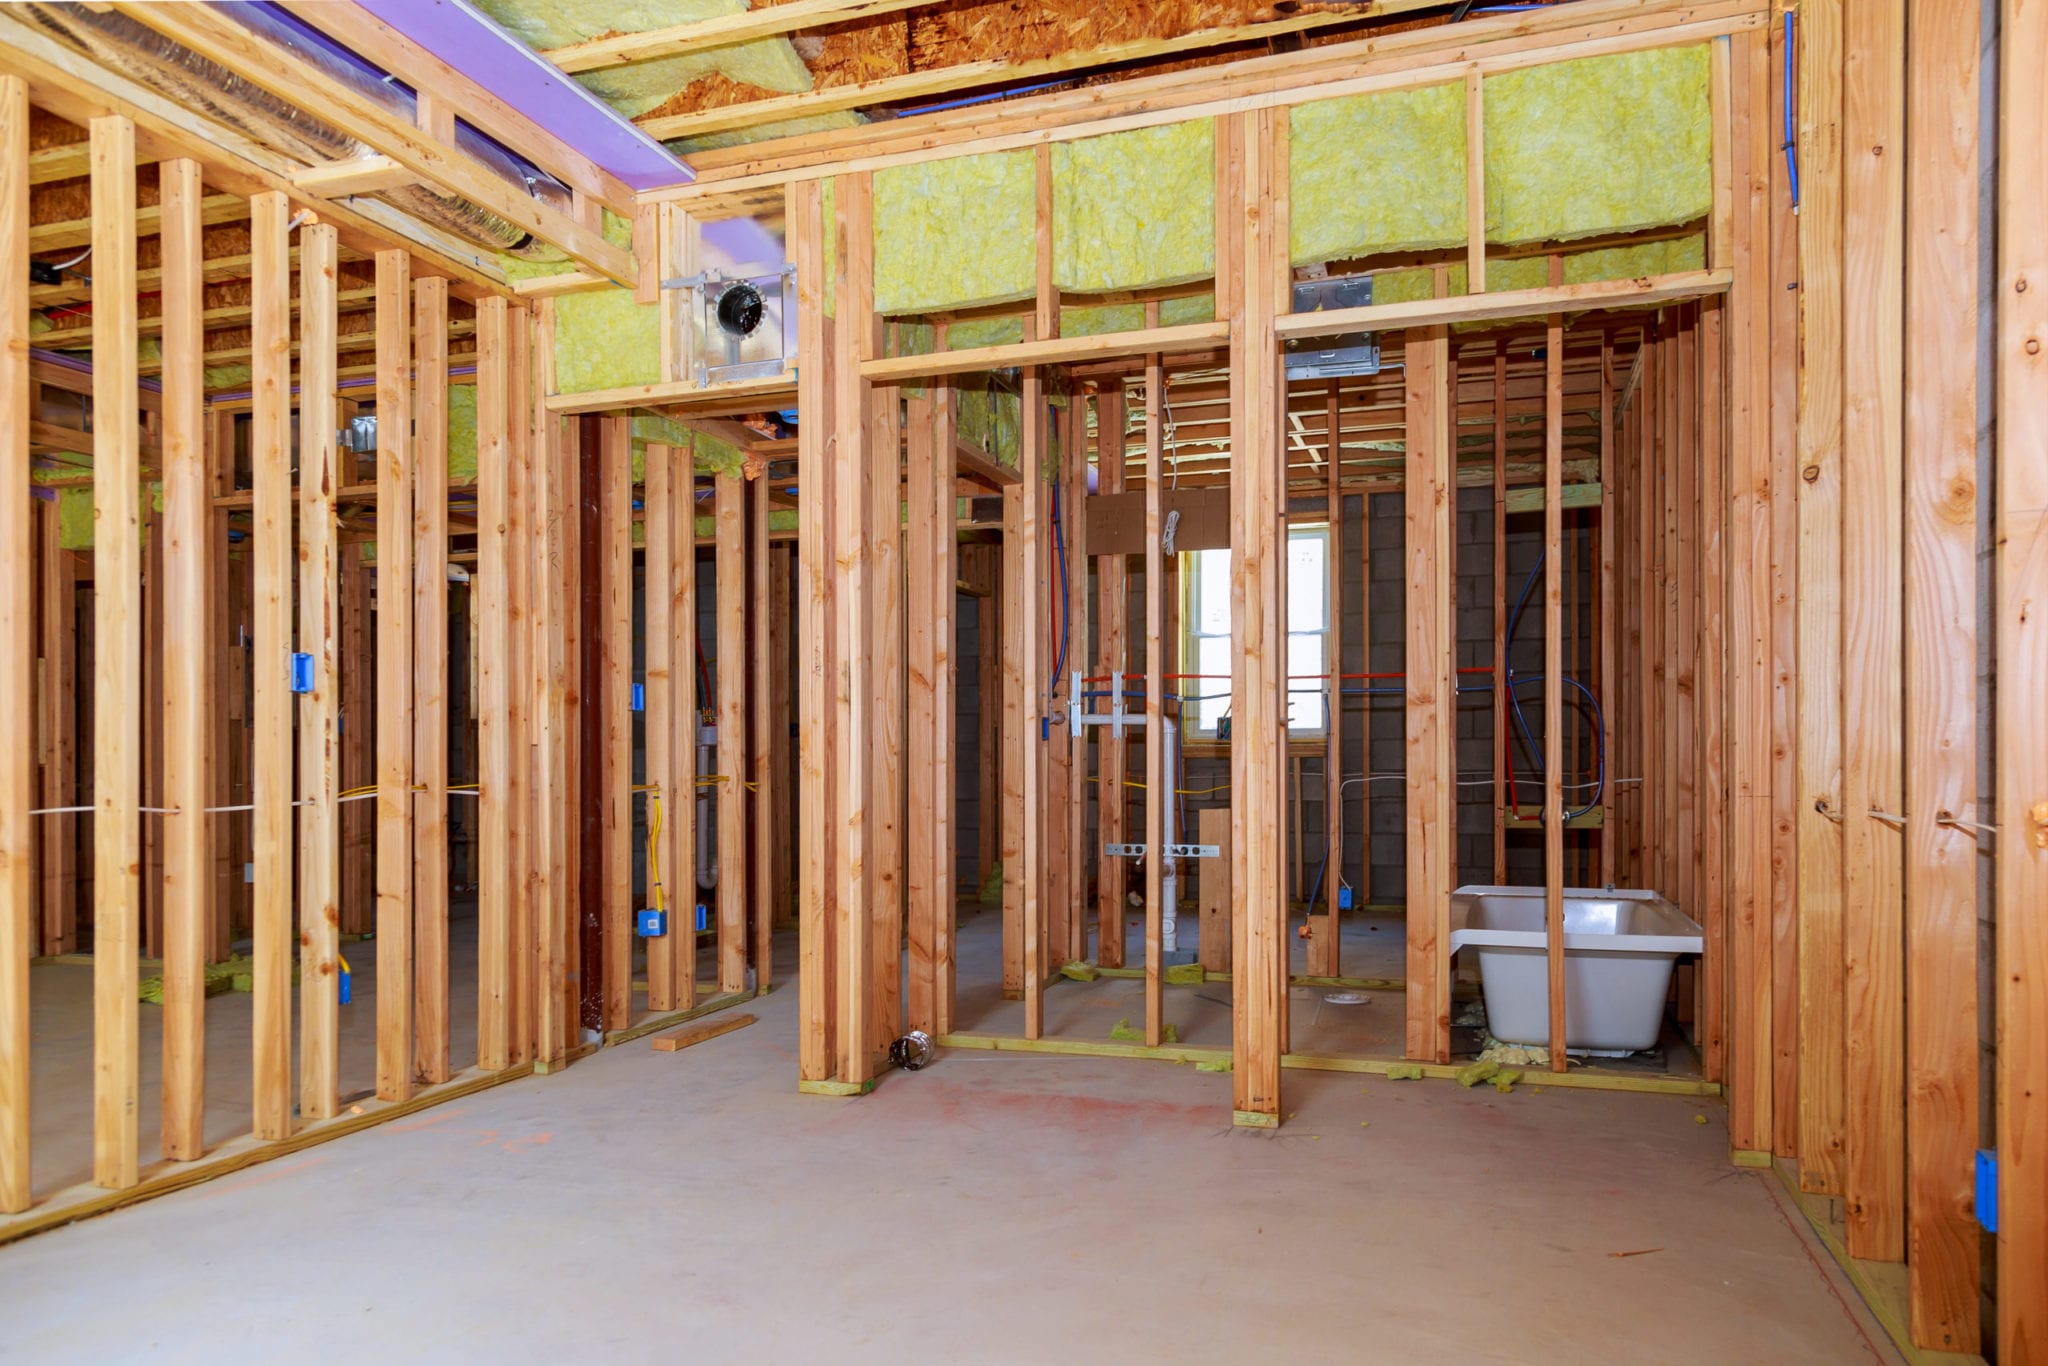 Interior wall framing with piping installation in the basement Bathroom remodel showing under floor plumbing work